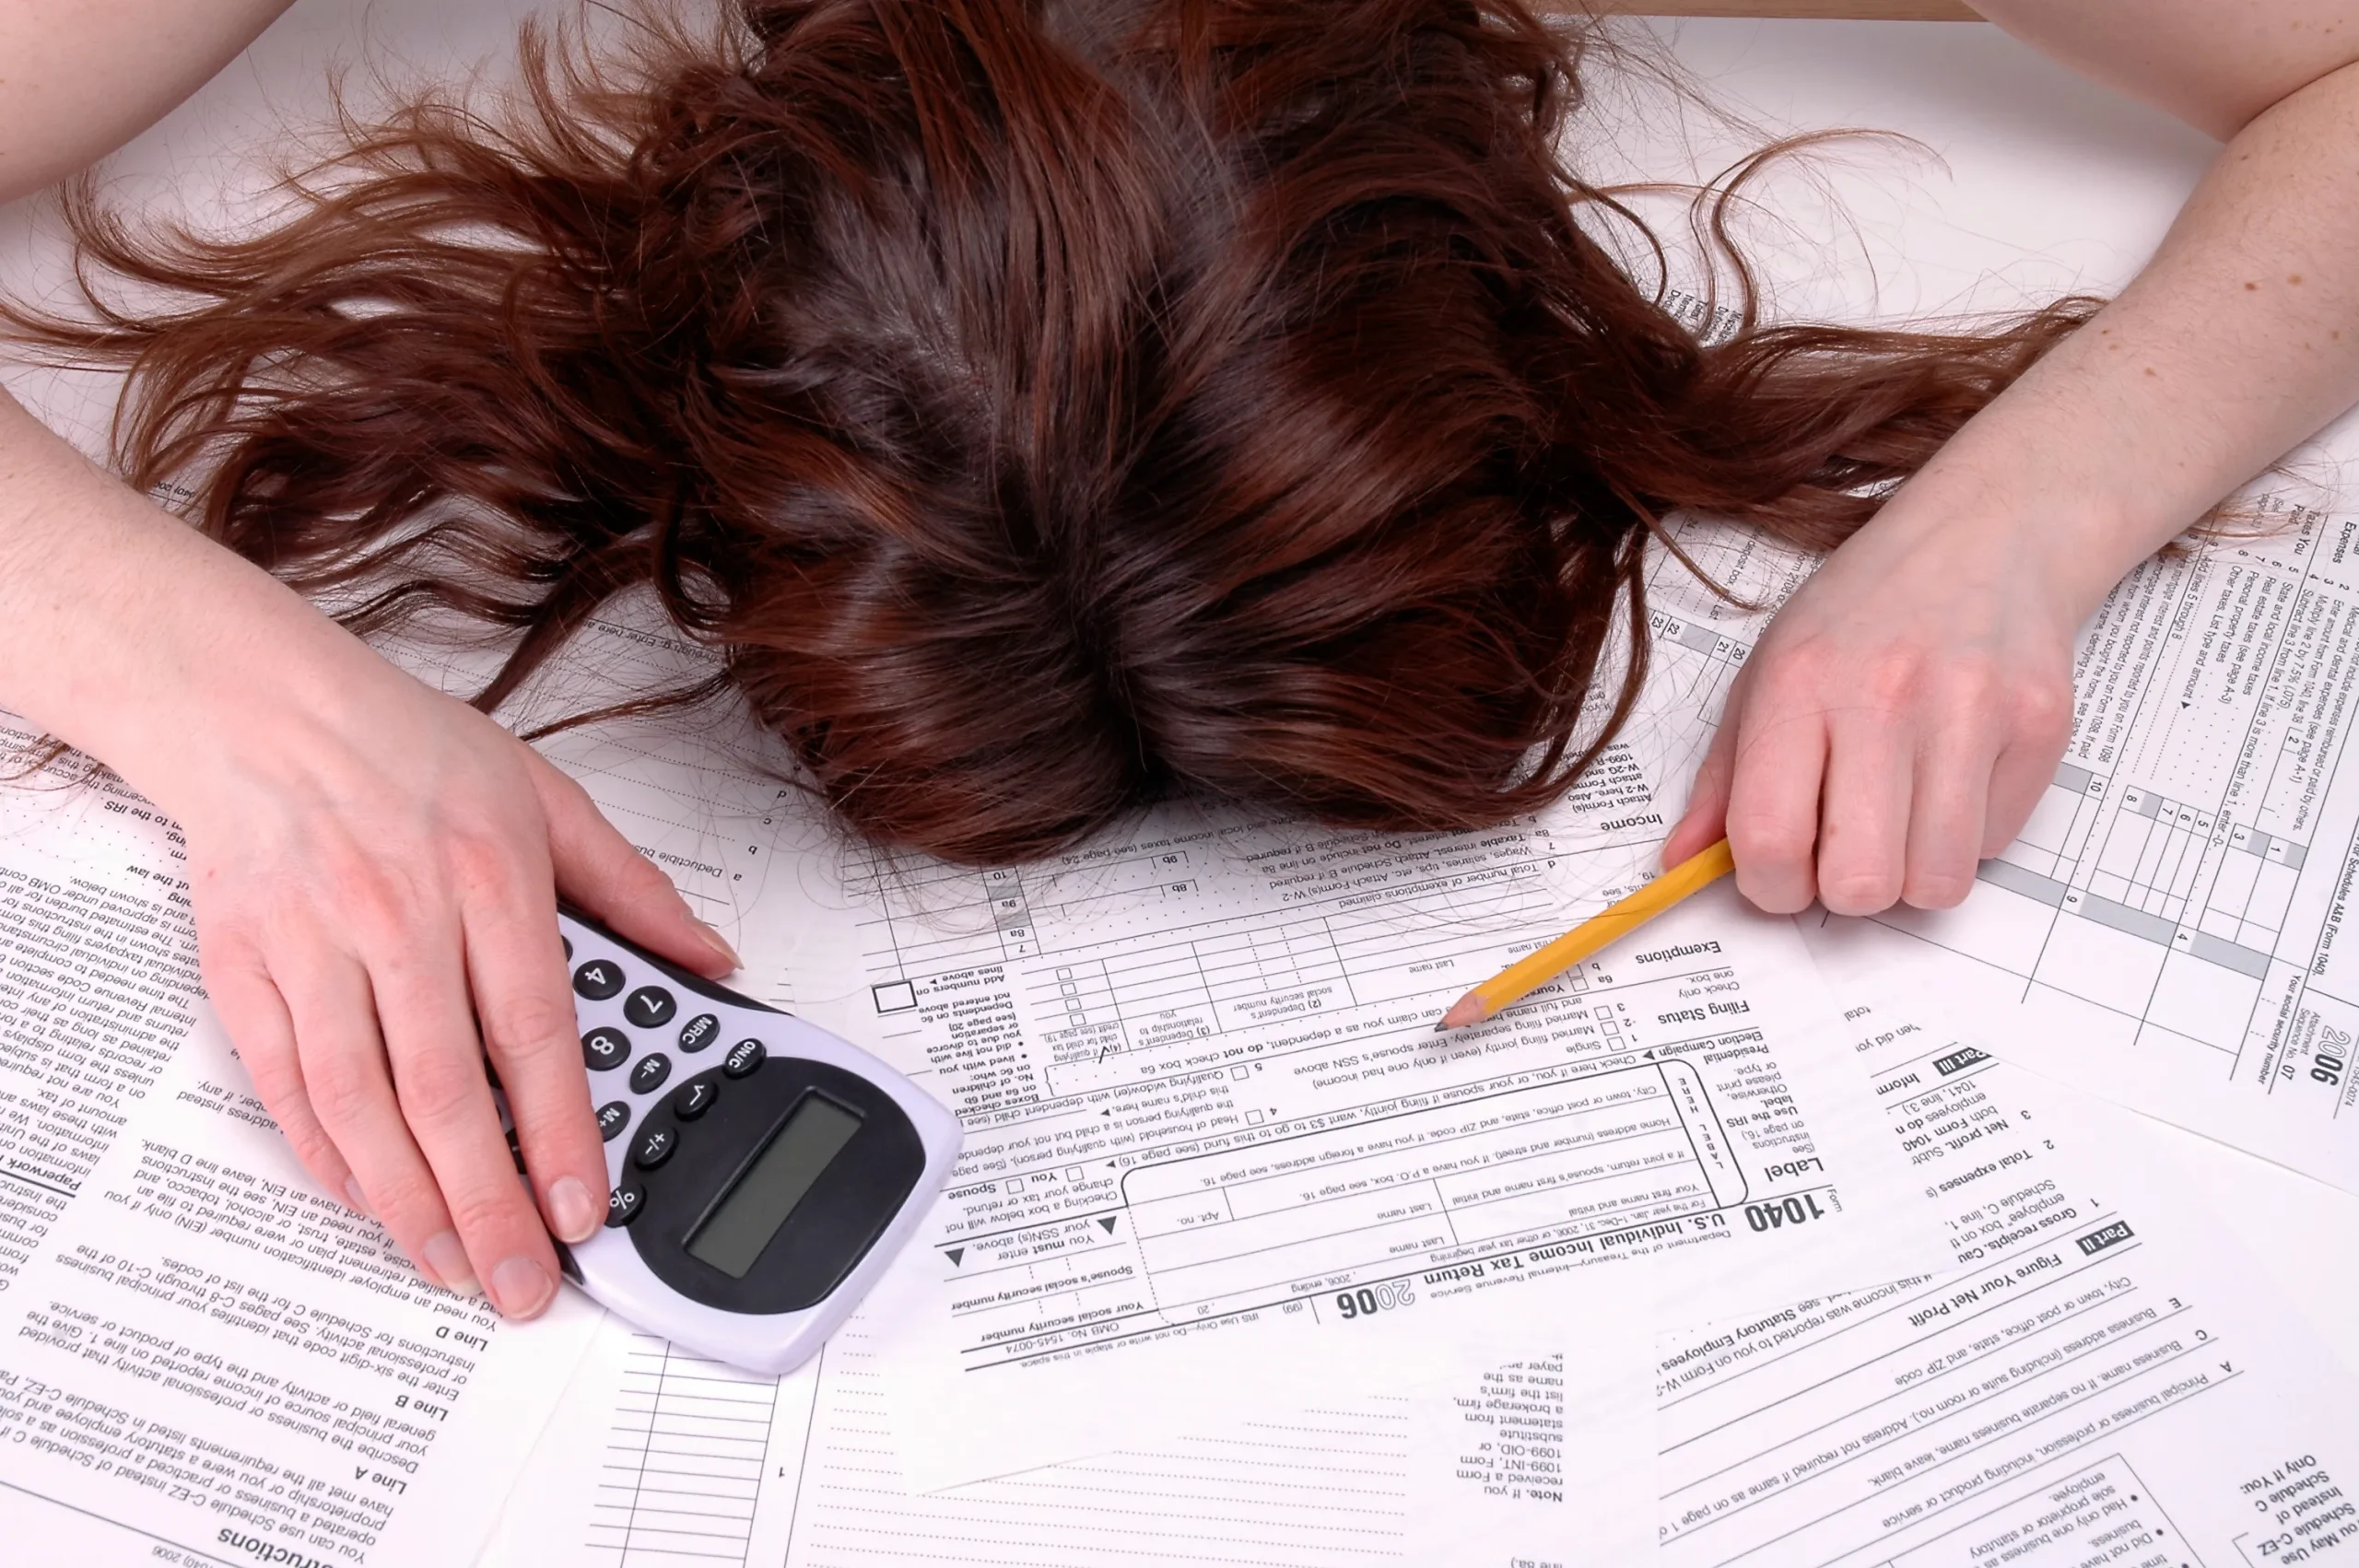 Woman laying on her debt bills with a calculator feeling overwhelmed.